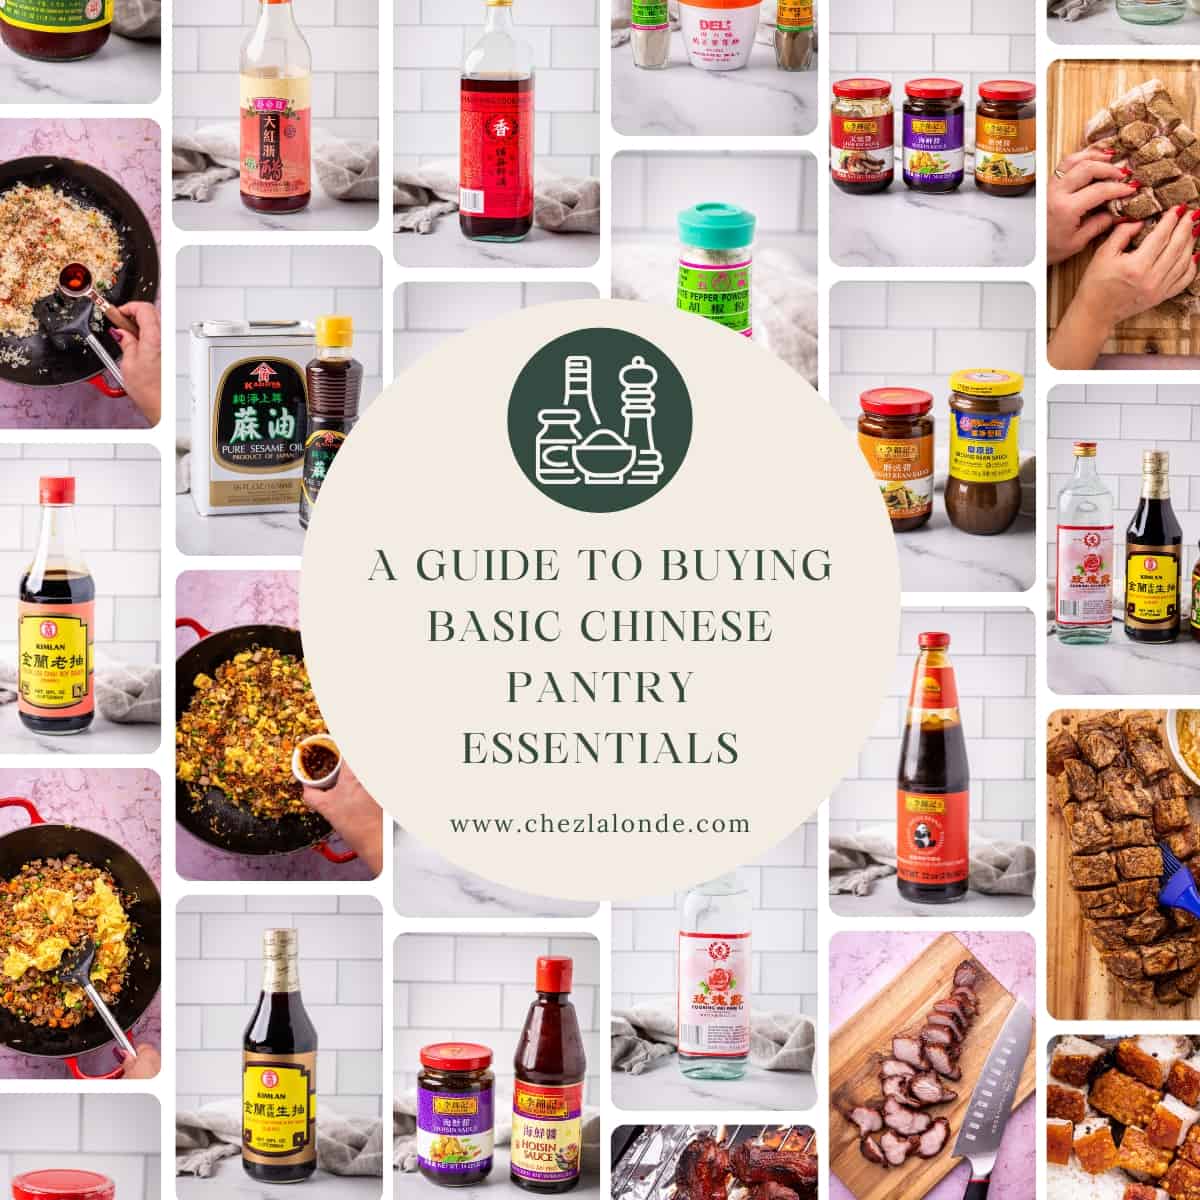 A Guide to Buying basic Chinese Pantry Essentials Cover photo.